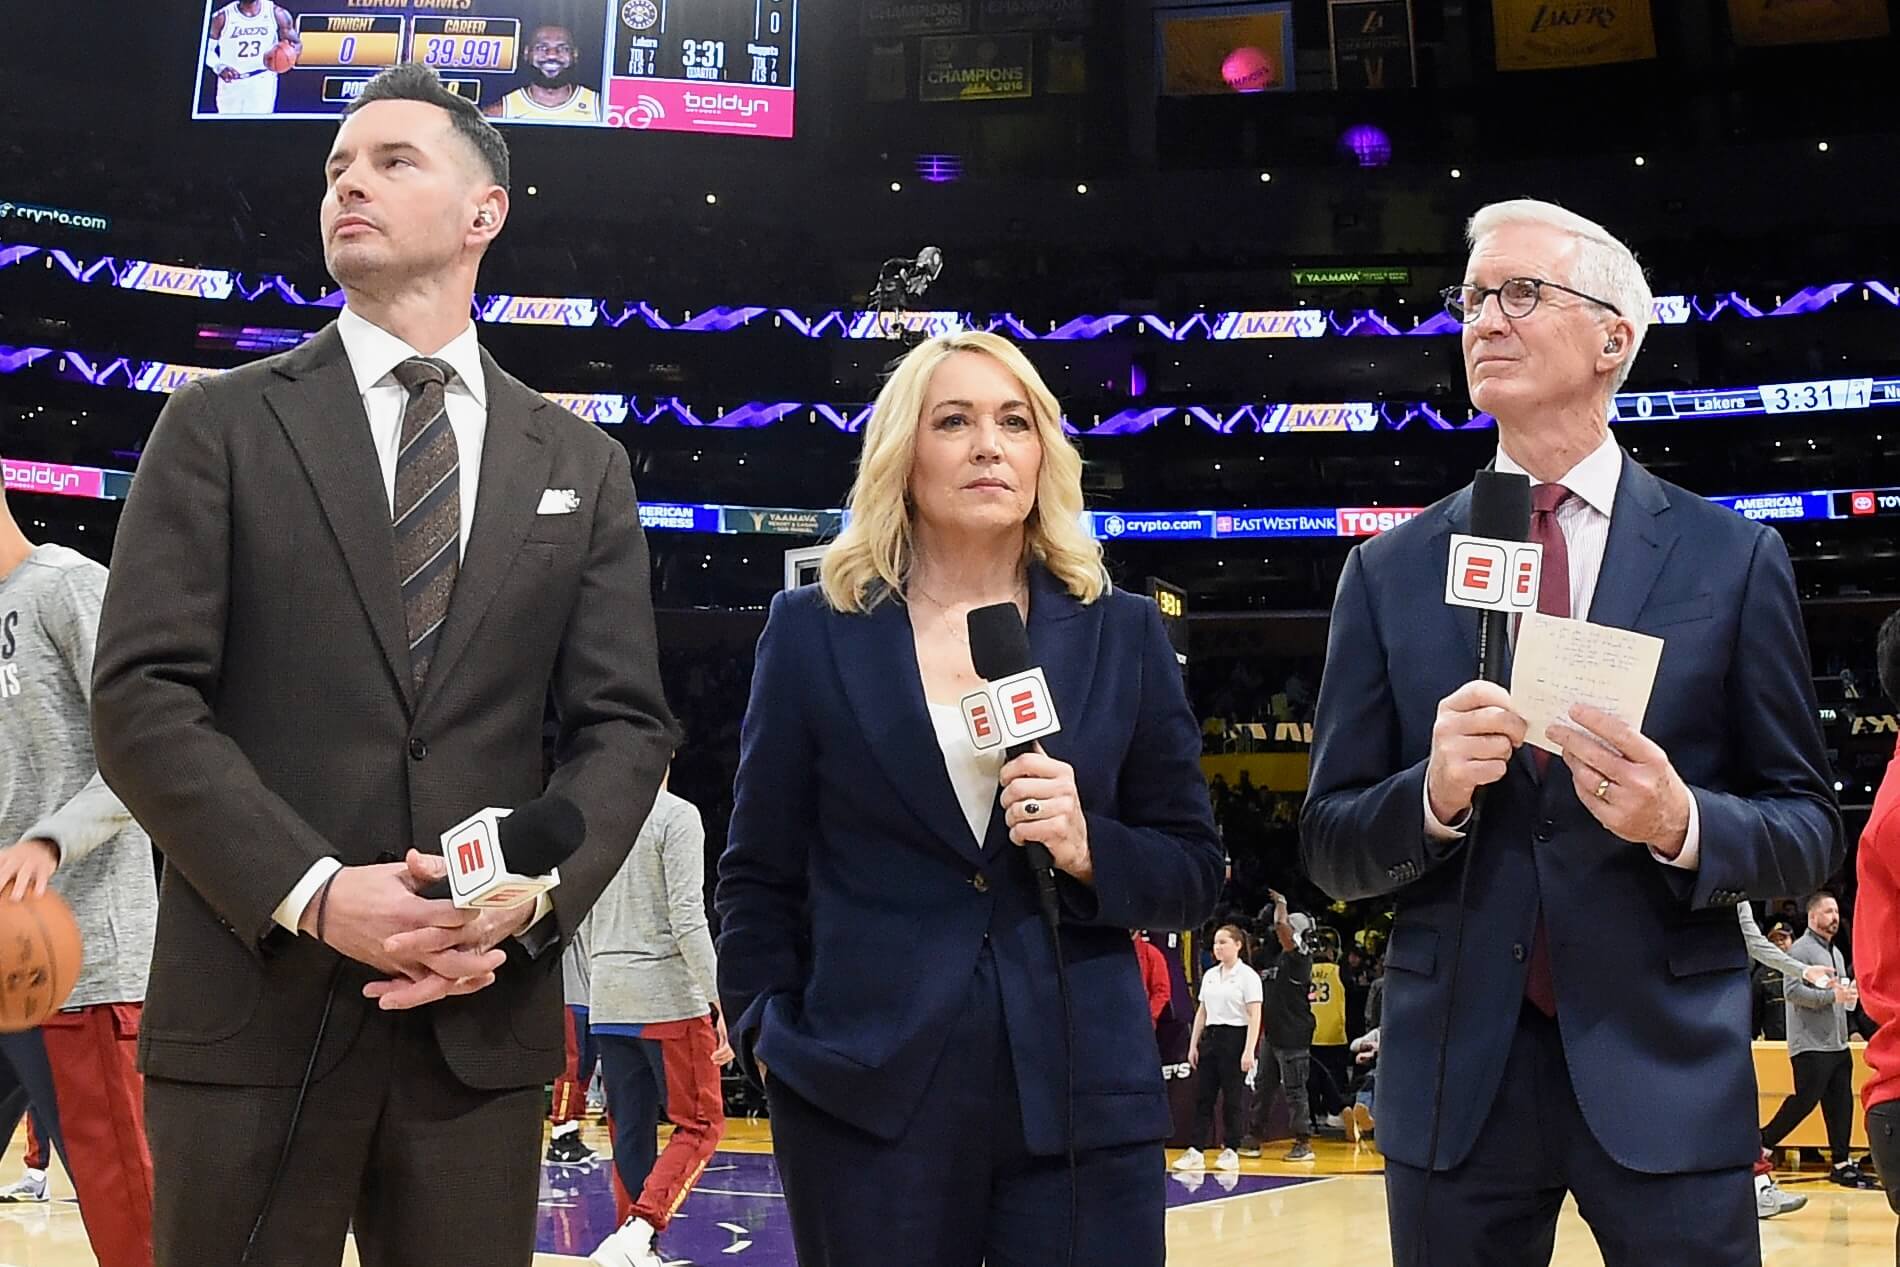 After the puzzling decision to let go of Jeff Van Gundy, ESPN's NBA broadcasts are worse off